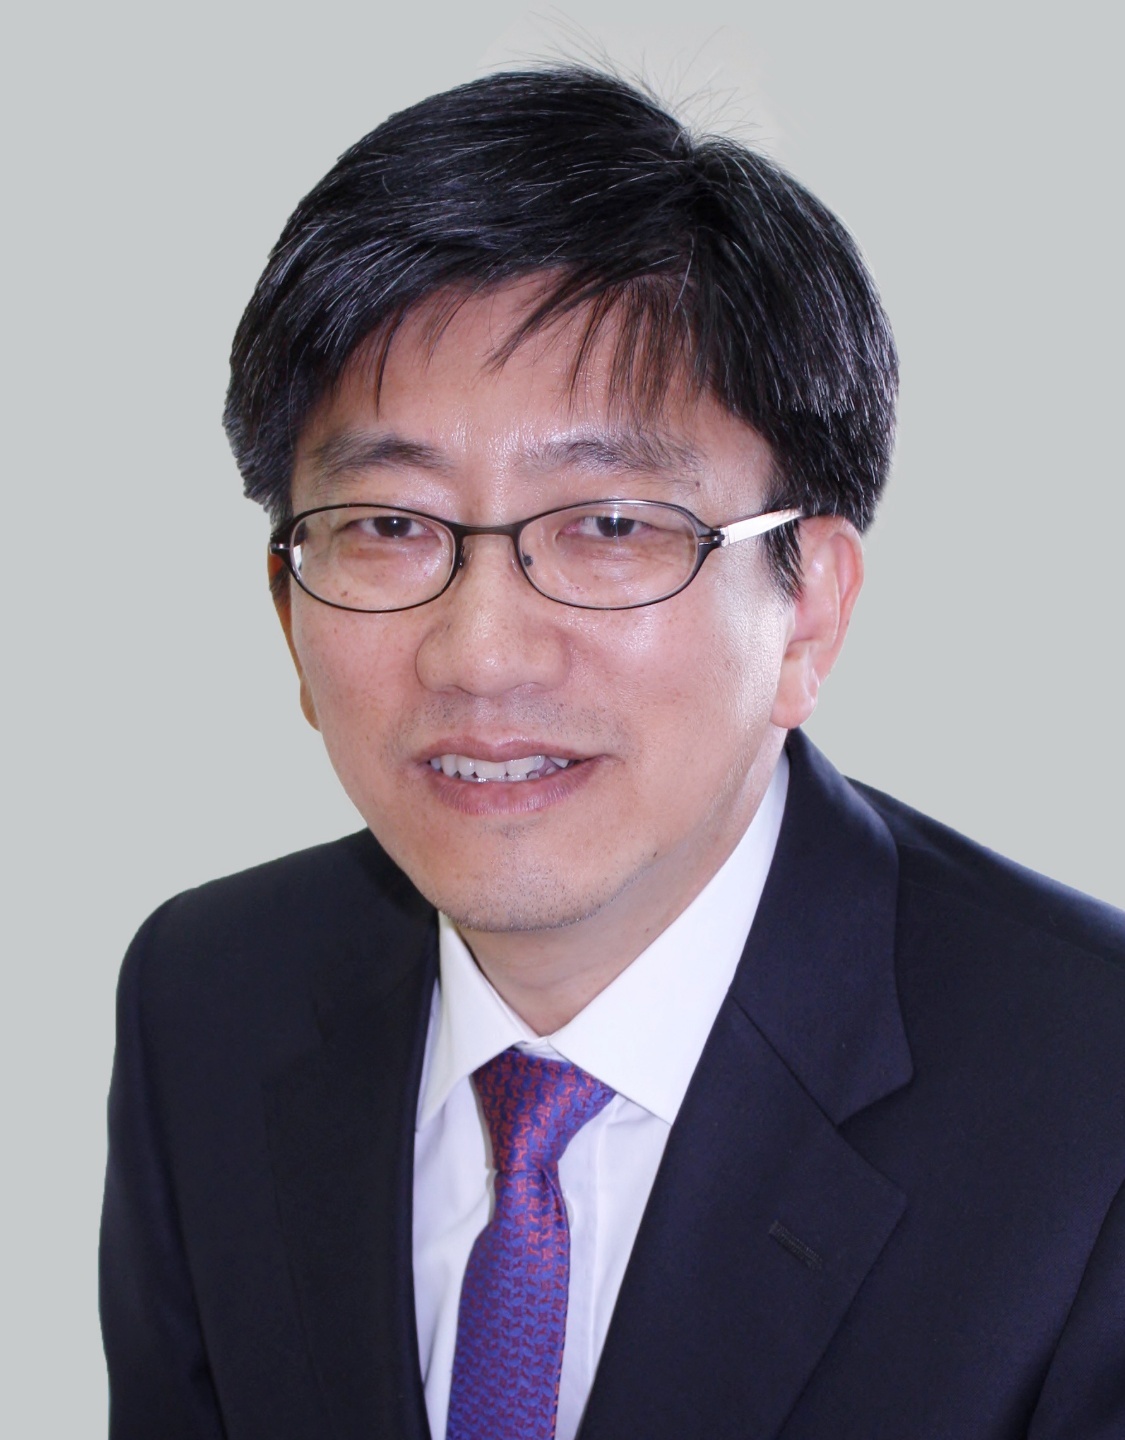 Lee Hee-jin, a professor of the Graduate School of International Studies in Yonsei University and director at the Center for Converging Industries and Standardization in the same University.